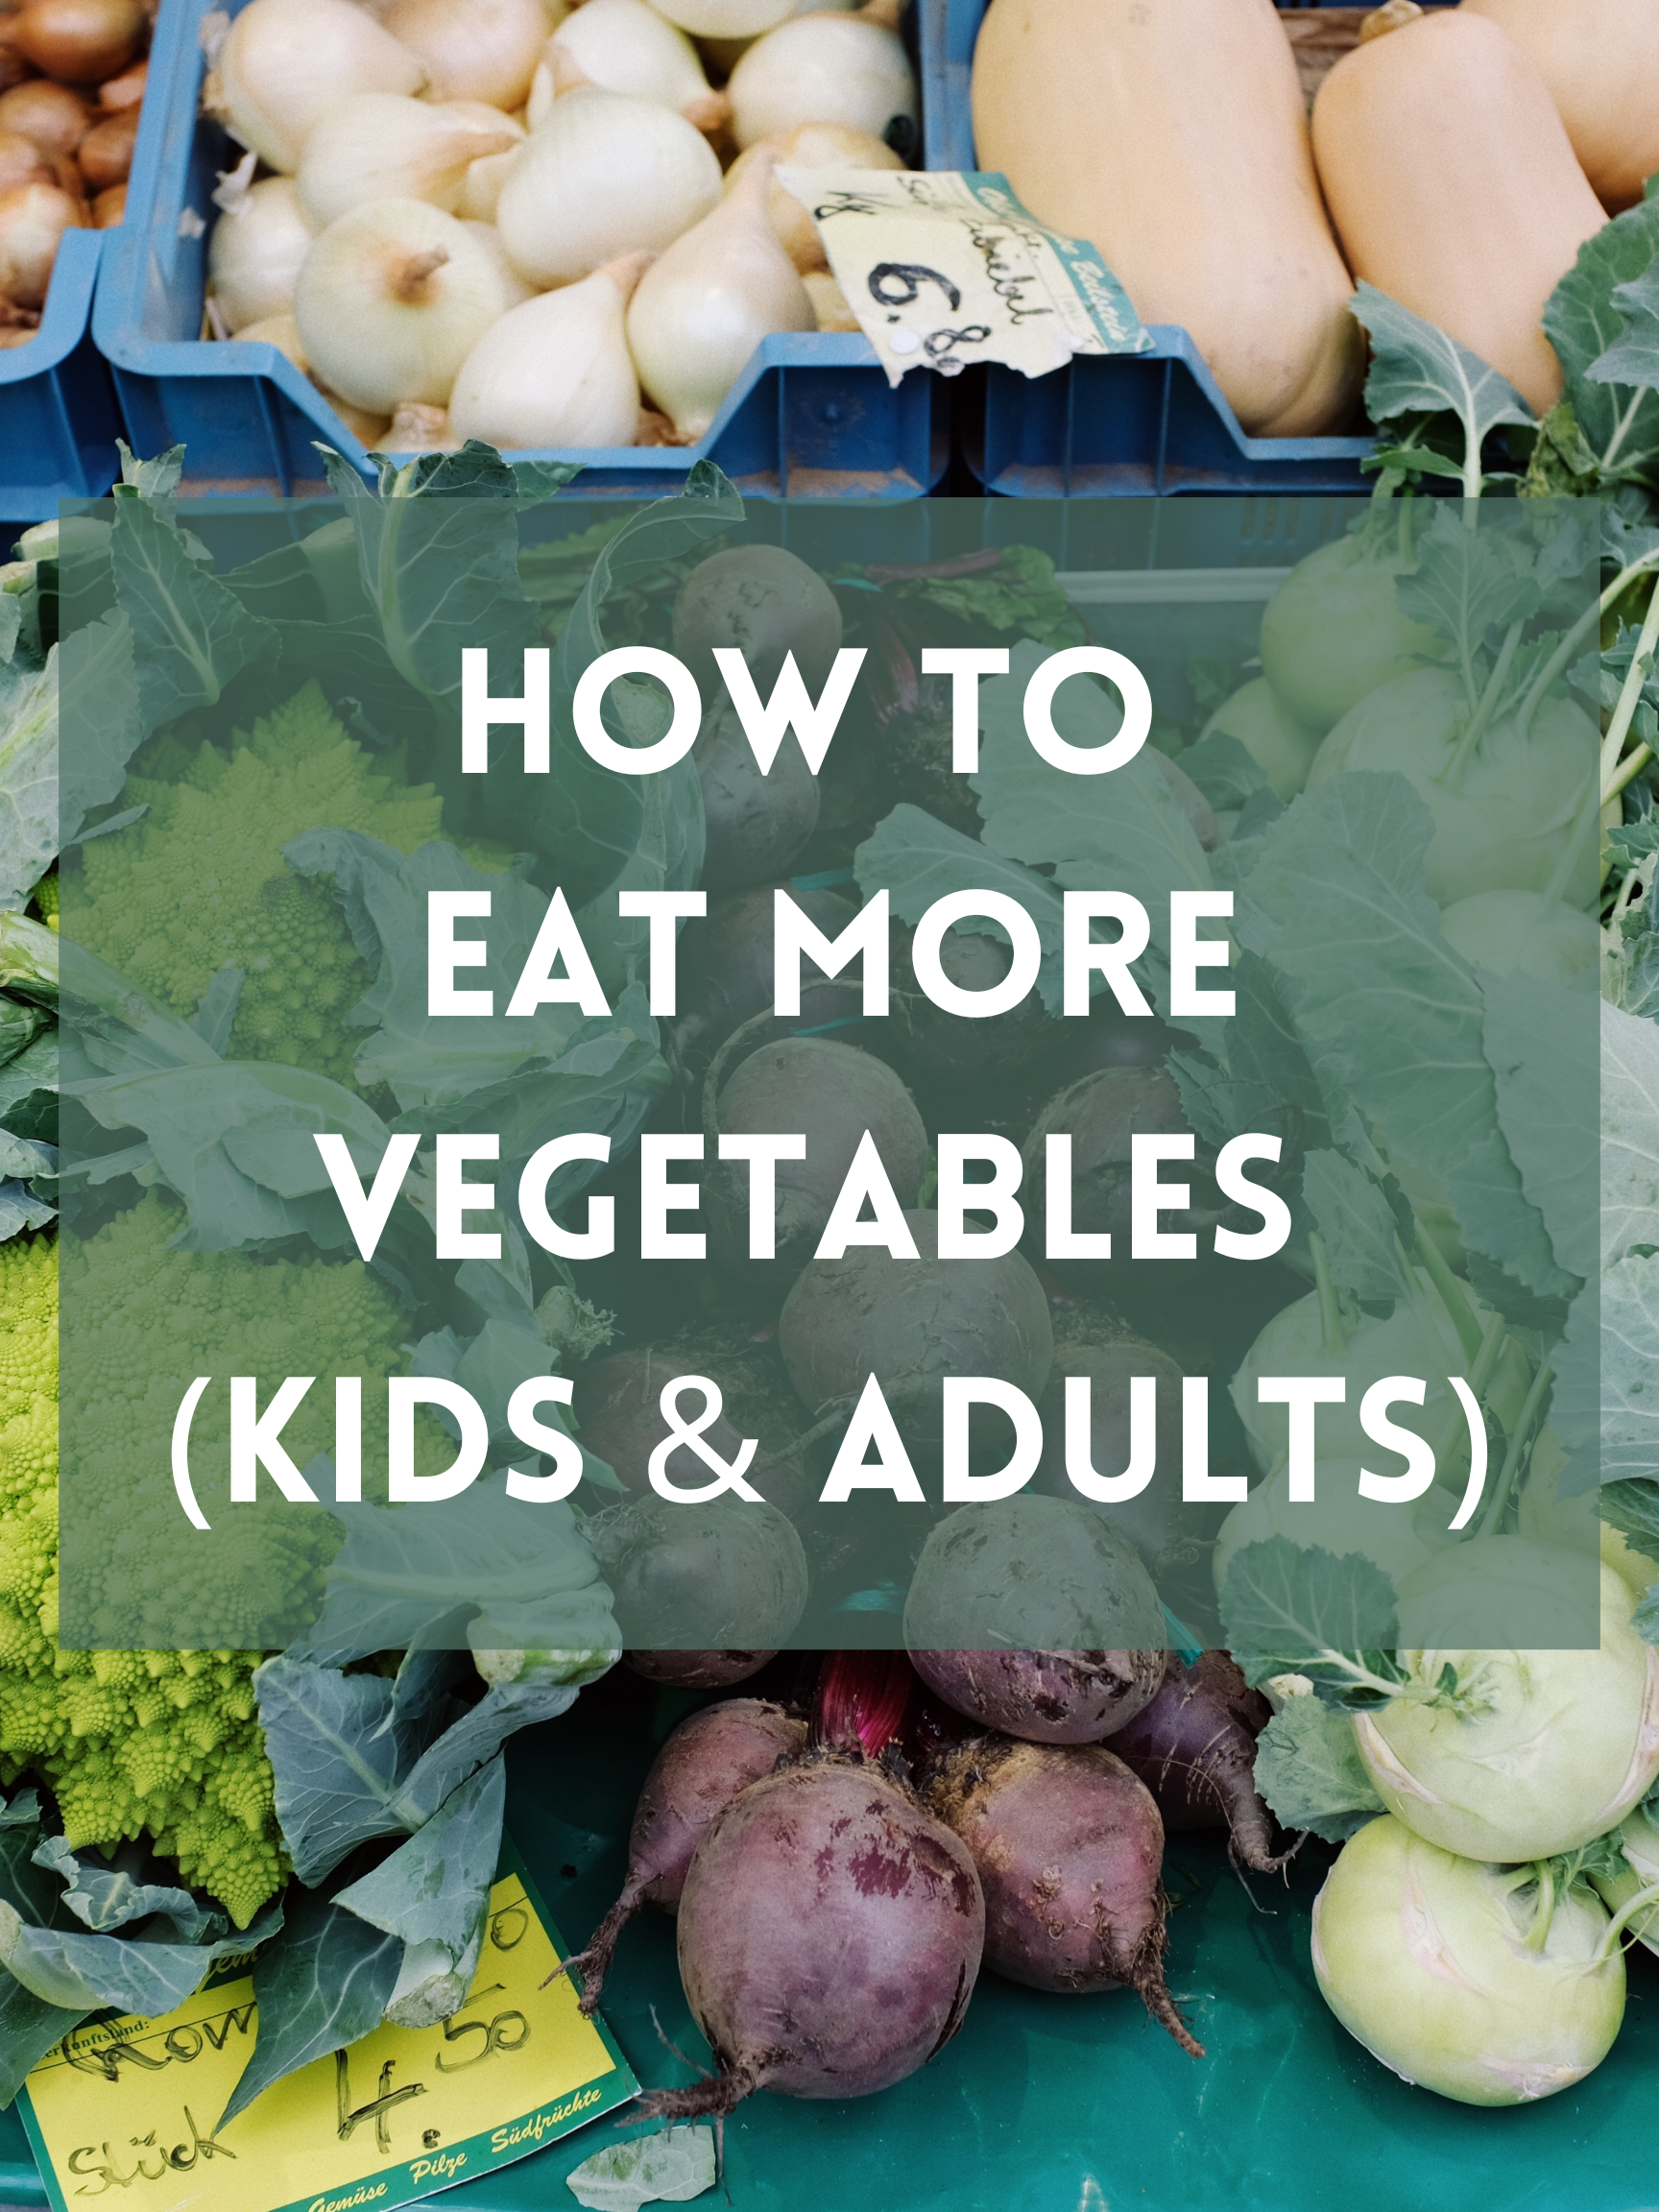 How to Eat More Vegetables (Kids & Adults)